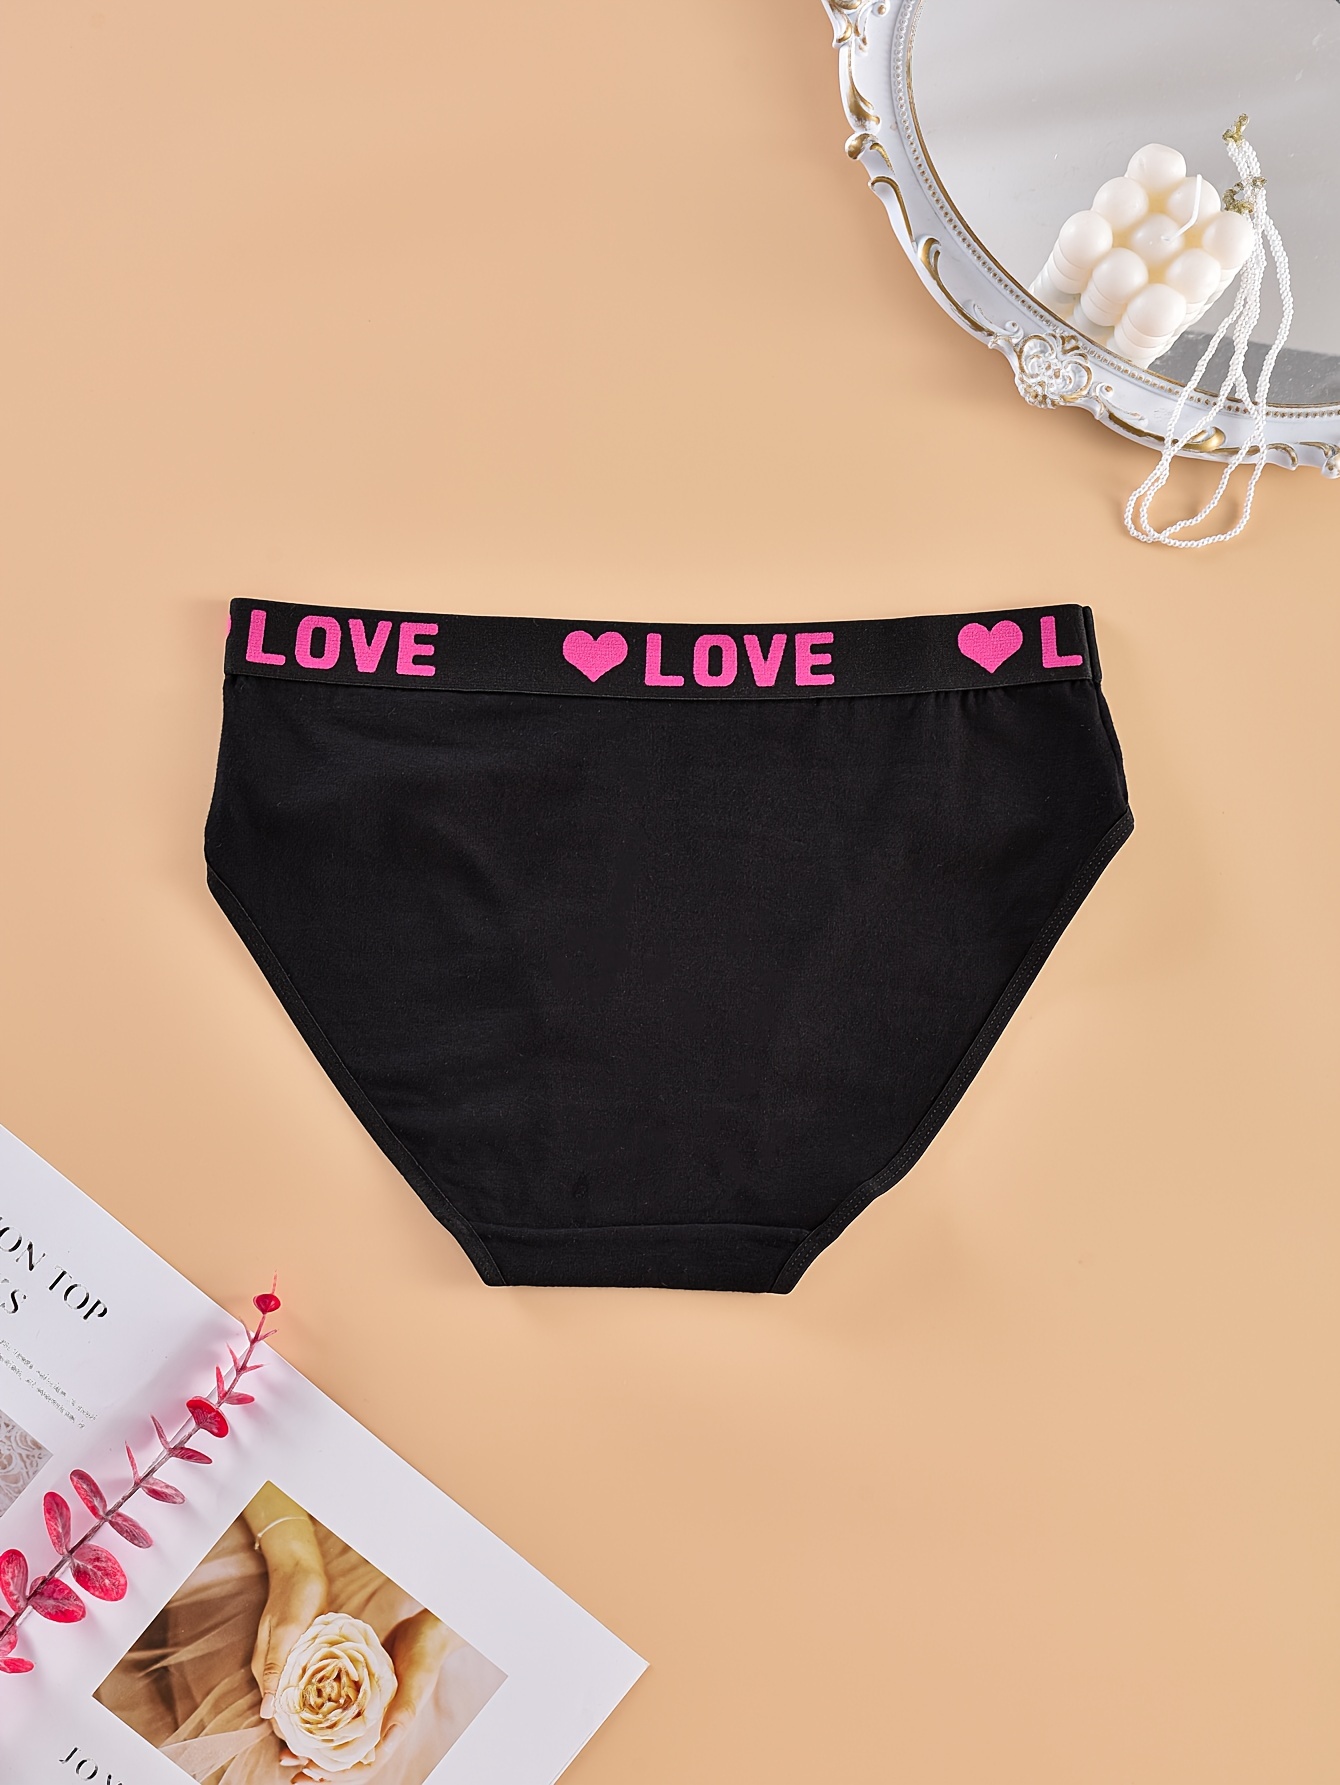 Is That The New 3pack Letter Tape Waist Panty Set ??